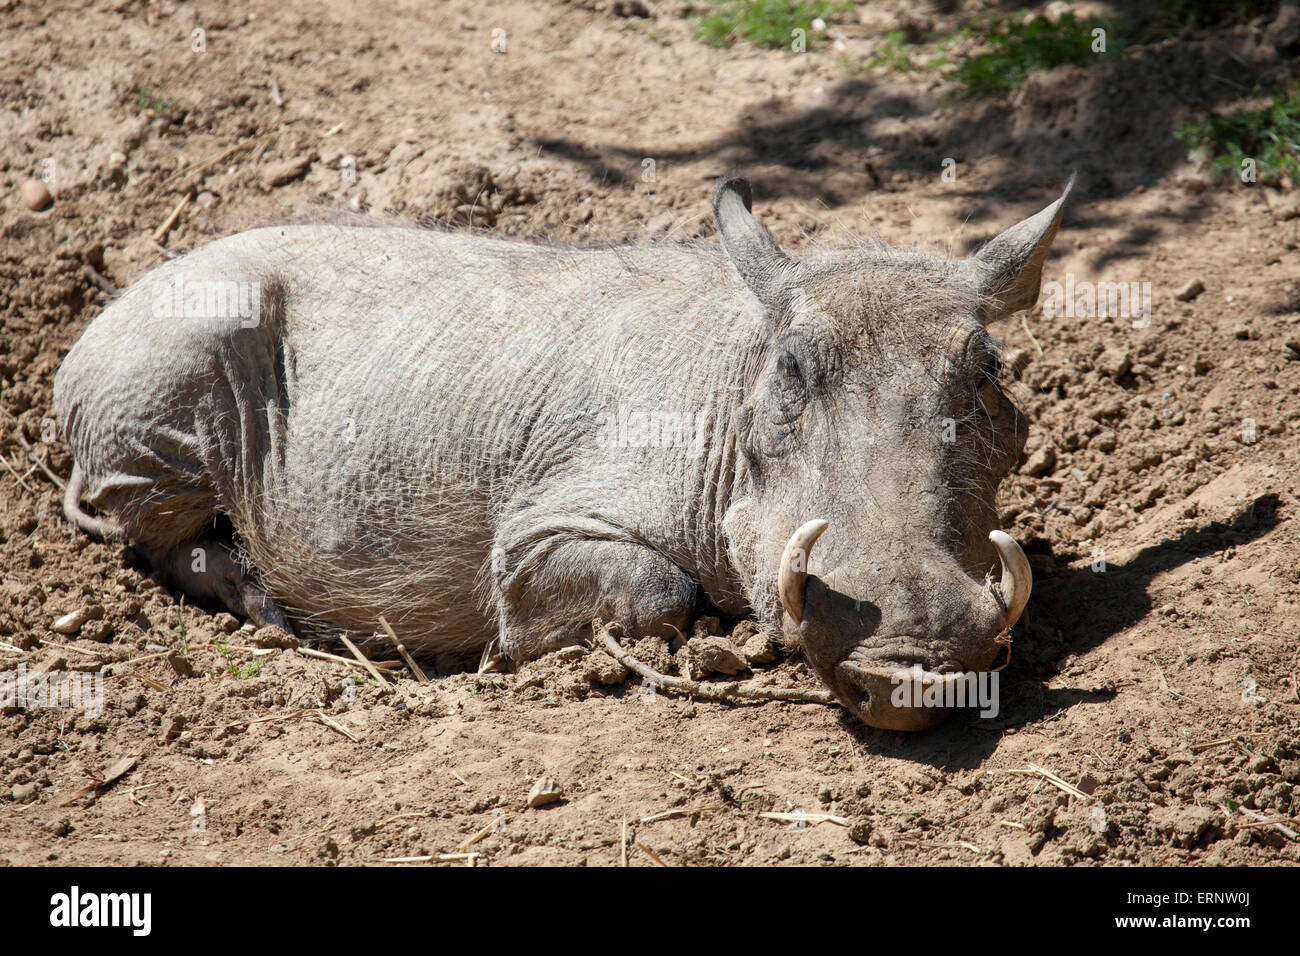 A landscape view of a Common Warthog lying in the sun Stock Photo